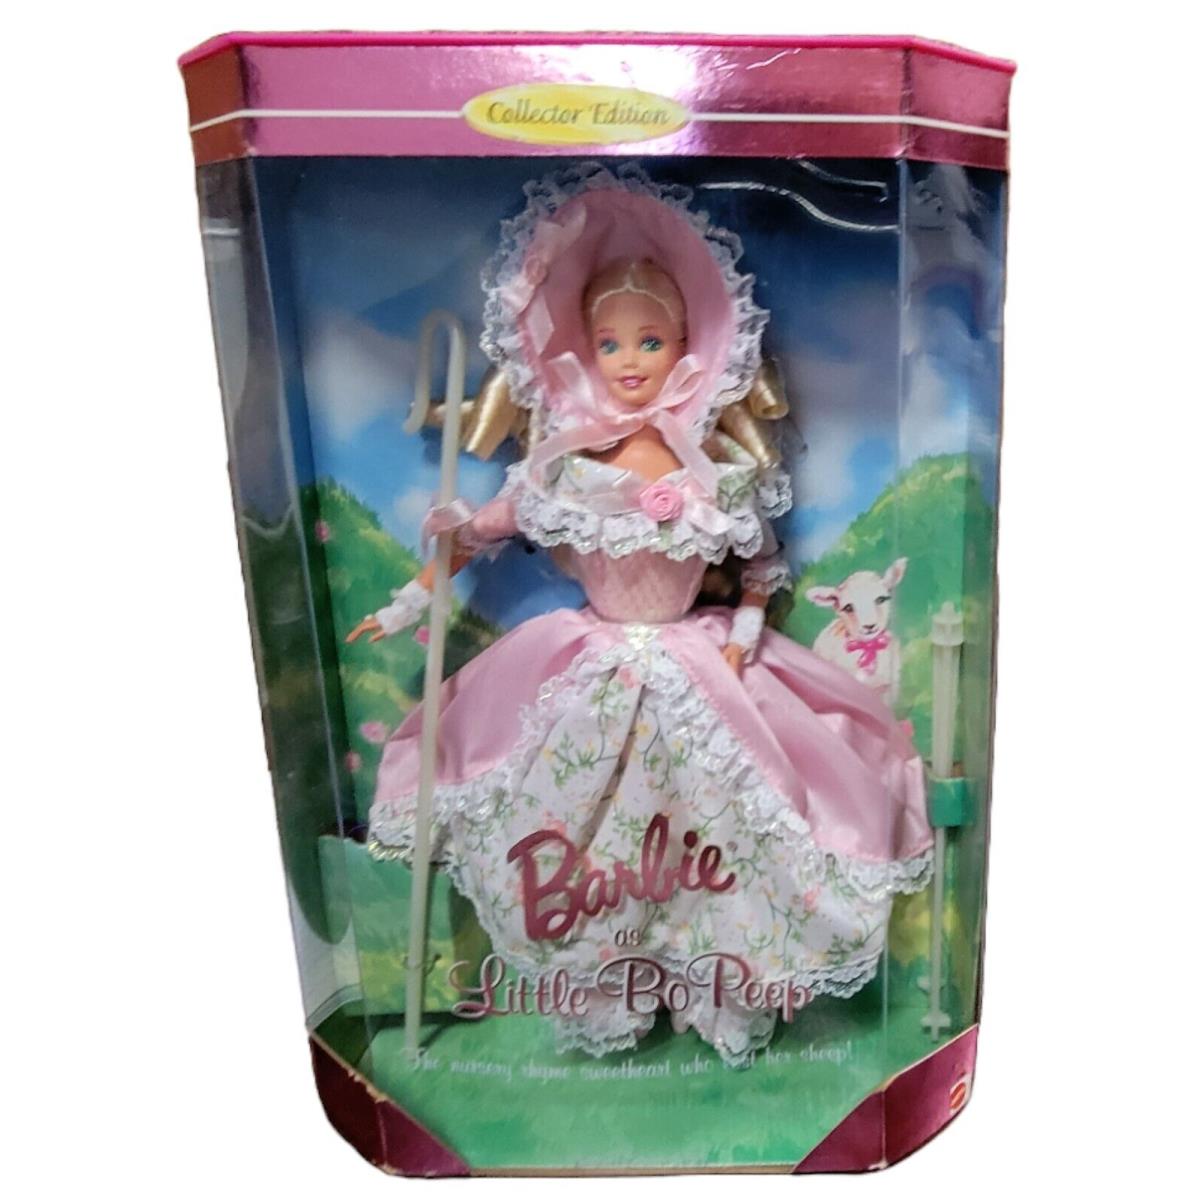 Vintage 1995 Barbie As Little Bo Peep Collector Edition with Price Tag